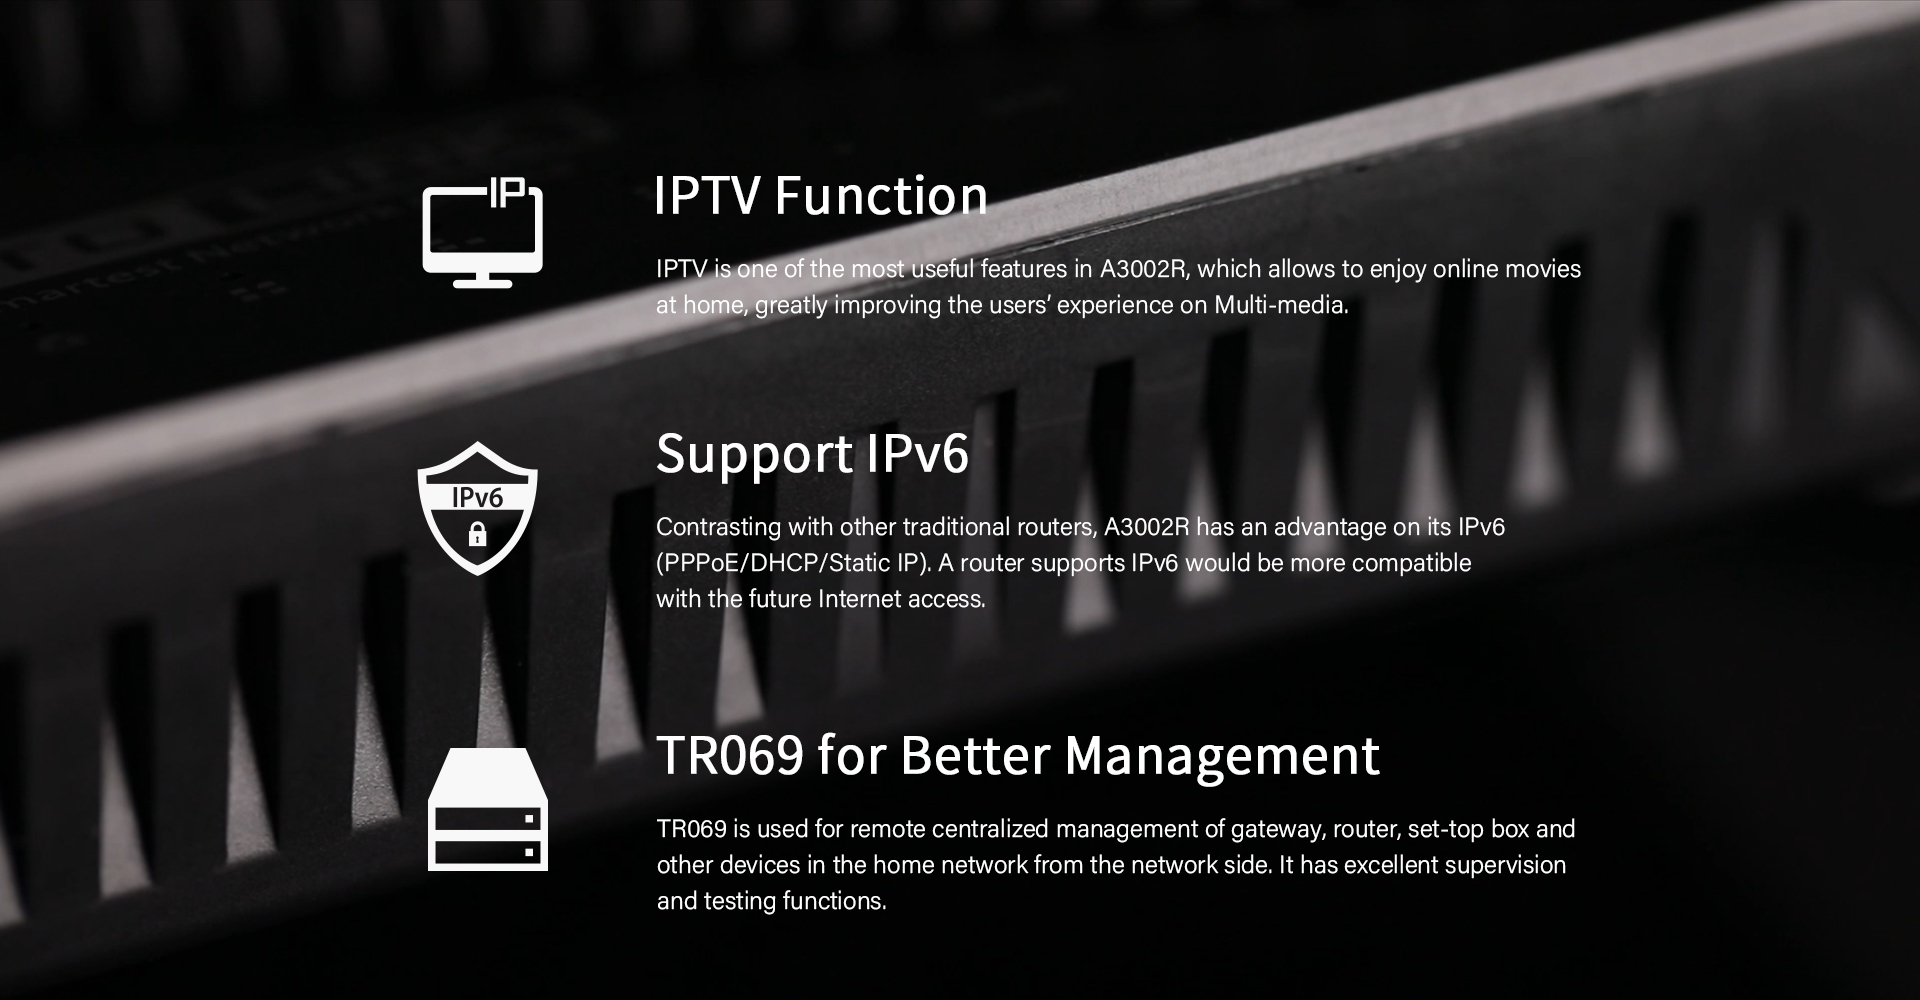 IPTV and IPV6 Support 